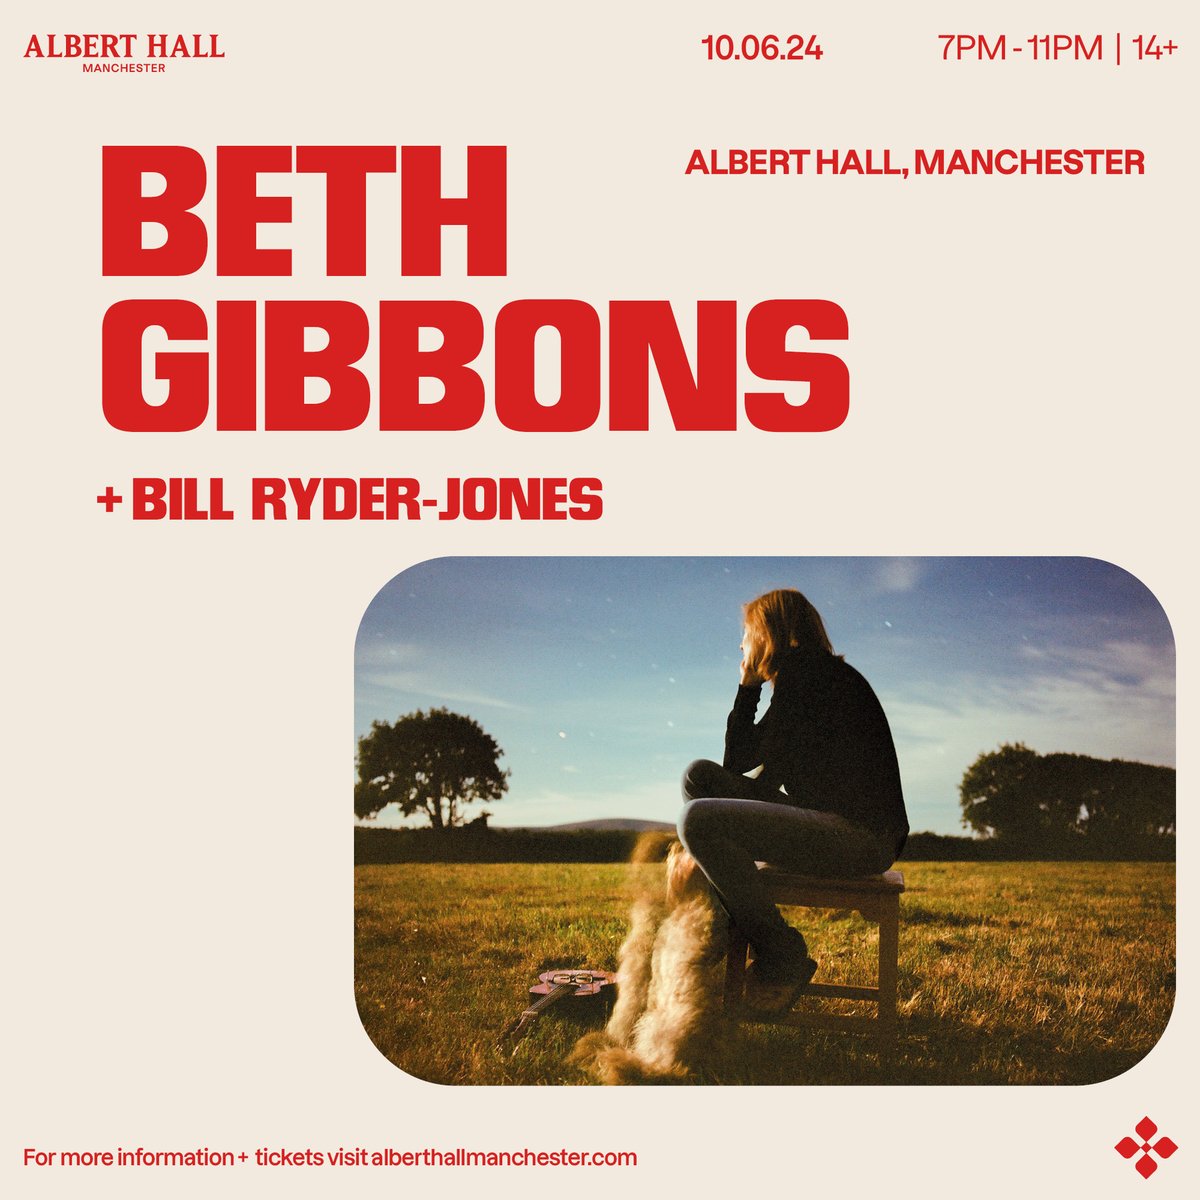 1 MONTH TO GO: #Portishead's @realbethgibbons takes to our venue showcasing her solo works, alongside support from @BRyderJones, who brings a unique cello + guitar duo set! Don't miss out on tickets as they're close to selling out: tinyurl.com/enum5bxs